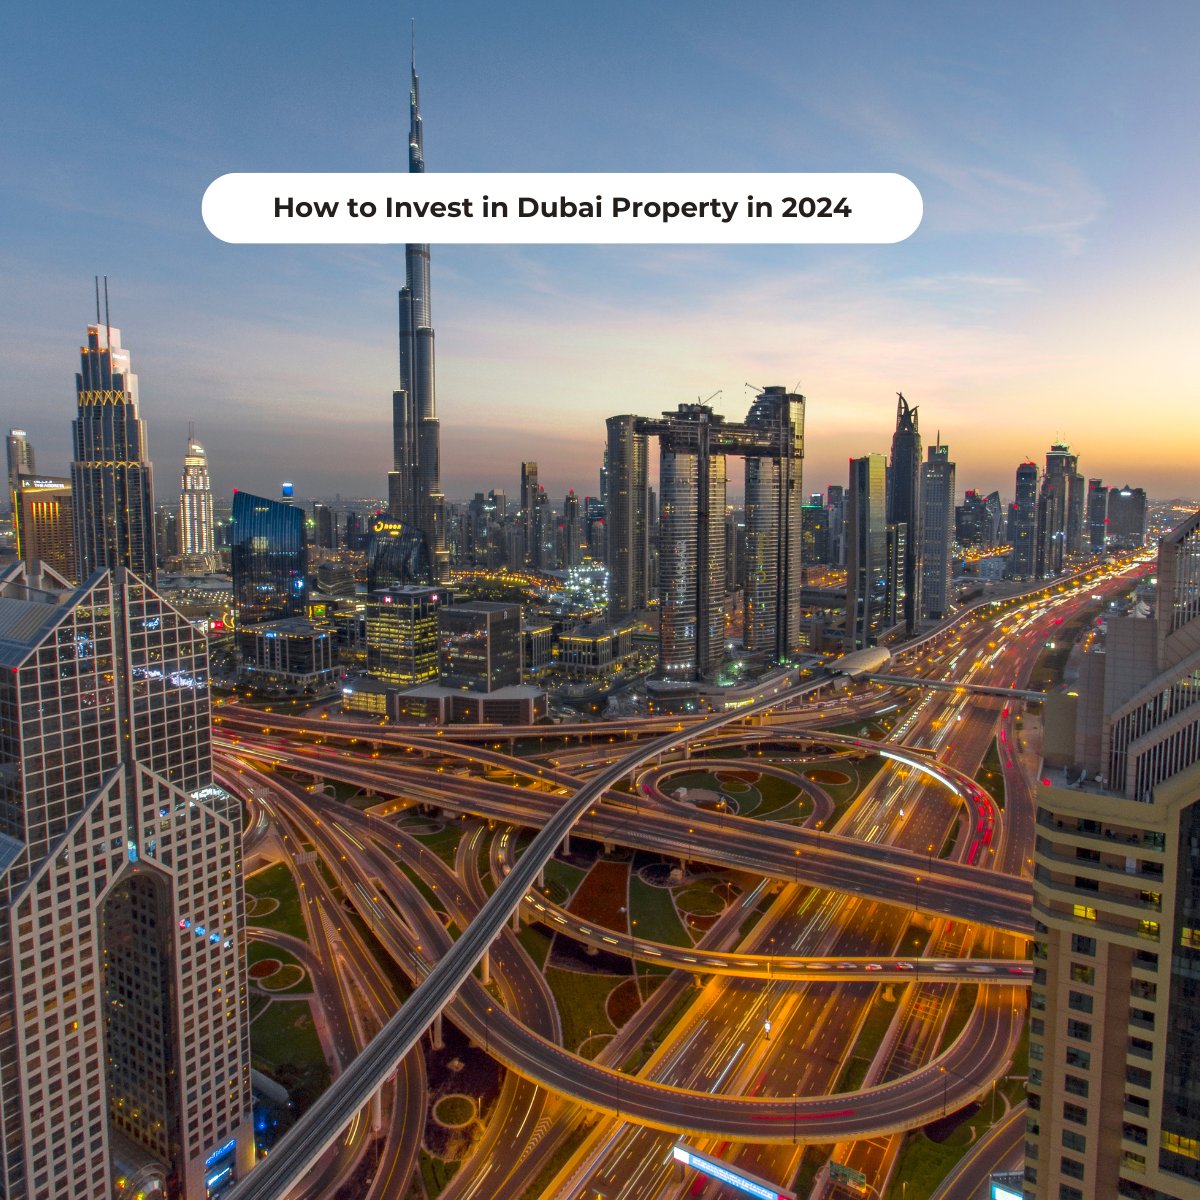 How do I invest in Dubai property in 2024?

read full blog - dubailiving.vip/update/how-to-…

#realestatedubai #dubai #dubairealestate #realestate #dubailife #uae #mydubai #dubaiproperty #dubaiproperties #dubaiinvestment #investment #luxuryrealestate #dxb #luxuryliving #realestateagent